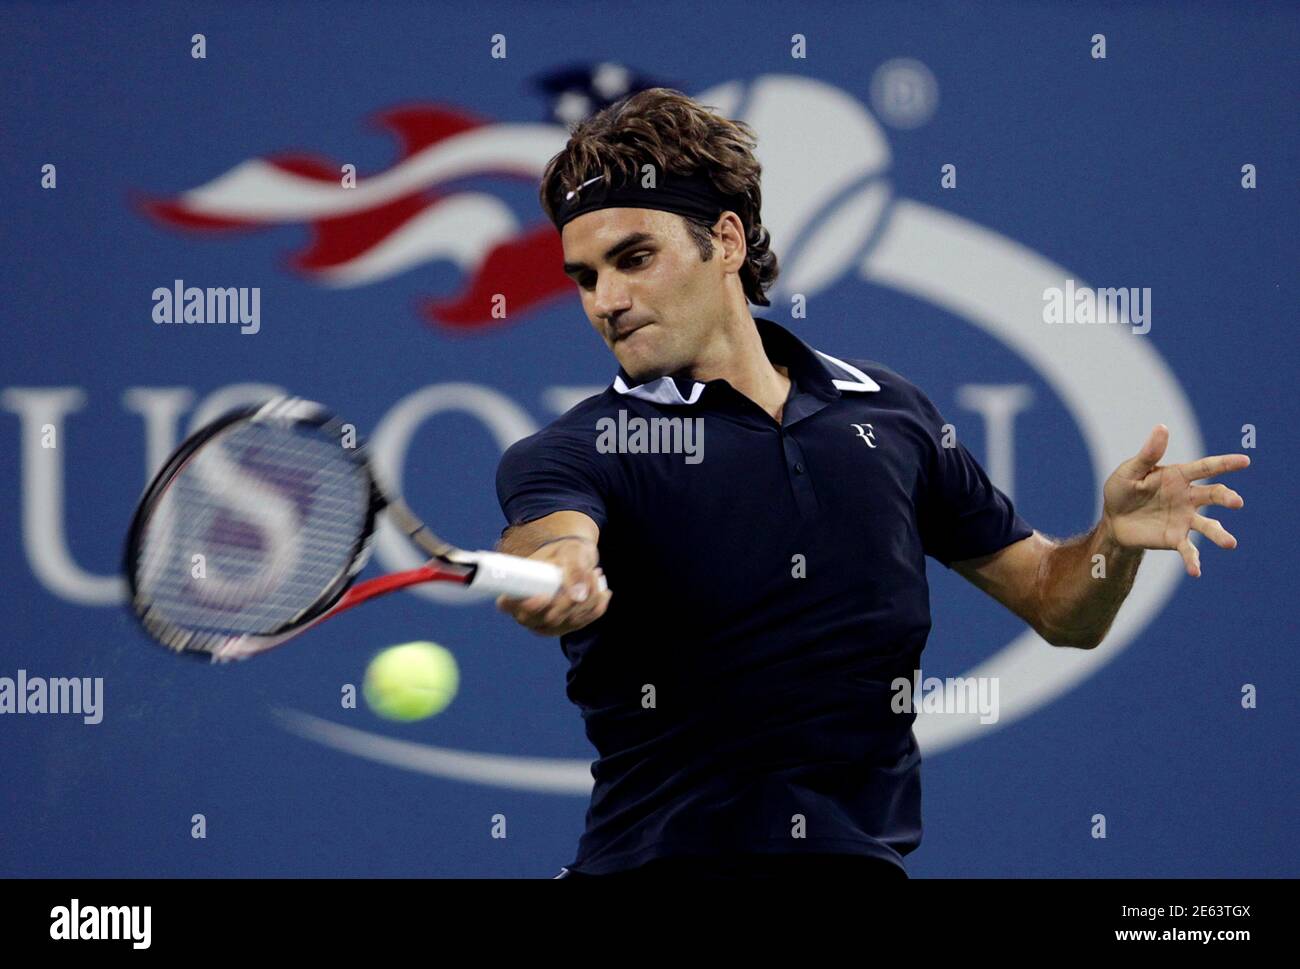 Roger Federer of Switzerland returns a forehand shot to Brian Dabul of  Argentina during their opening night match at the U.S. Open tennis  tournament New York, August 30, 2010. REUTERS/Lucas Jackson (UNITED